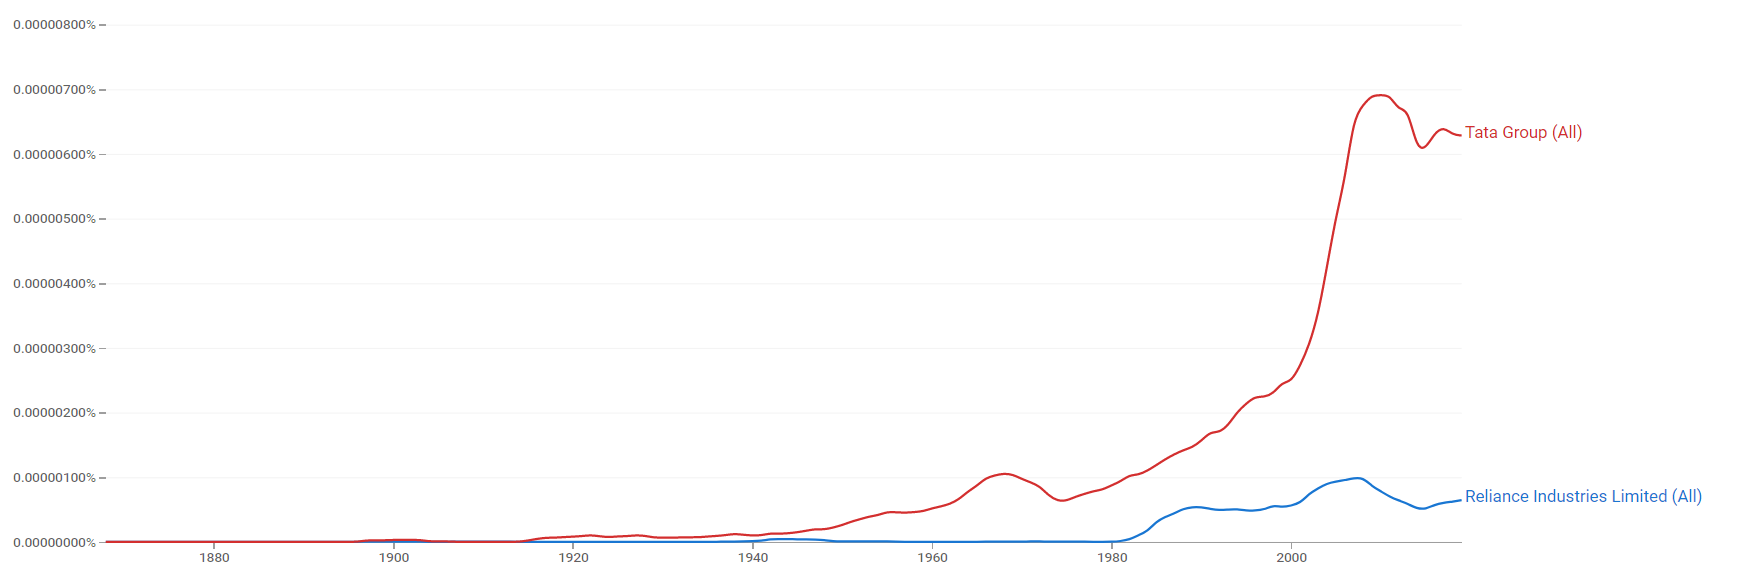 Reliance Industries Limited and Tata Group ngram.png